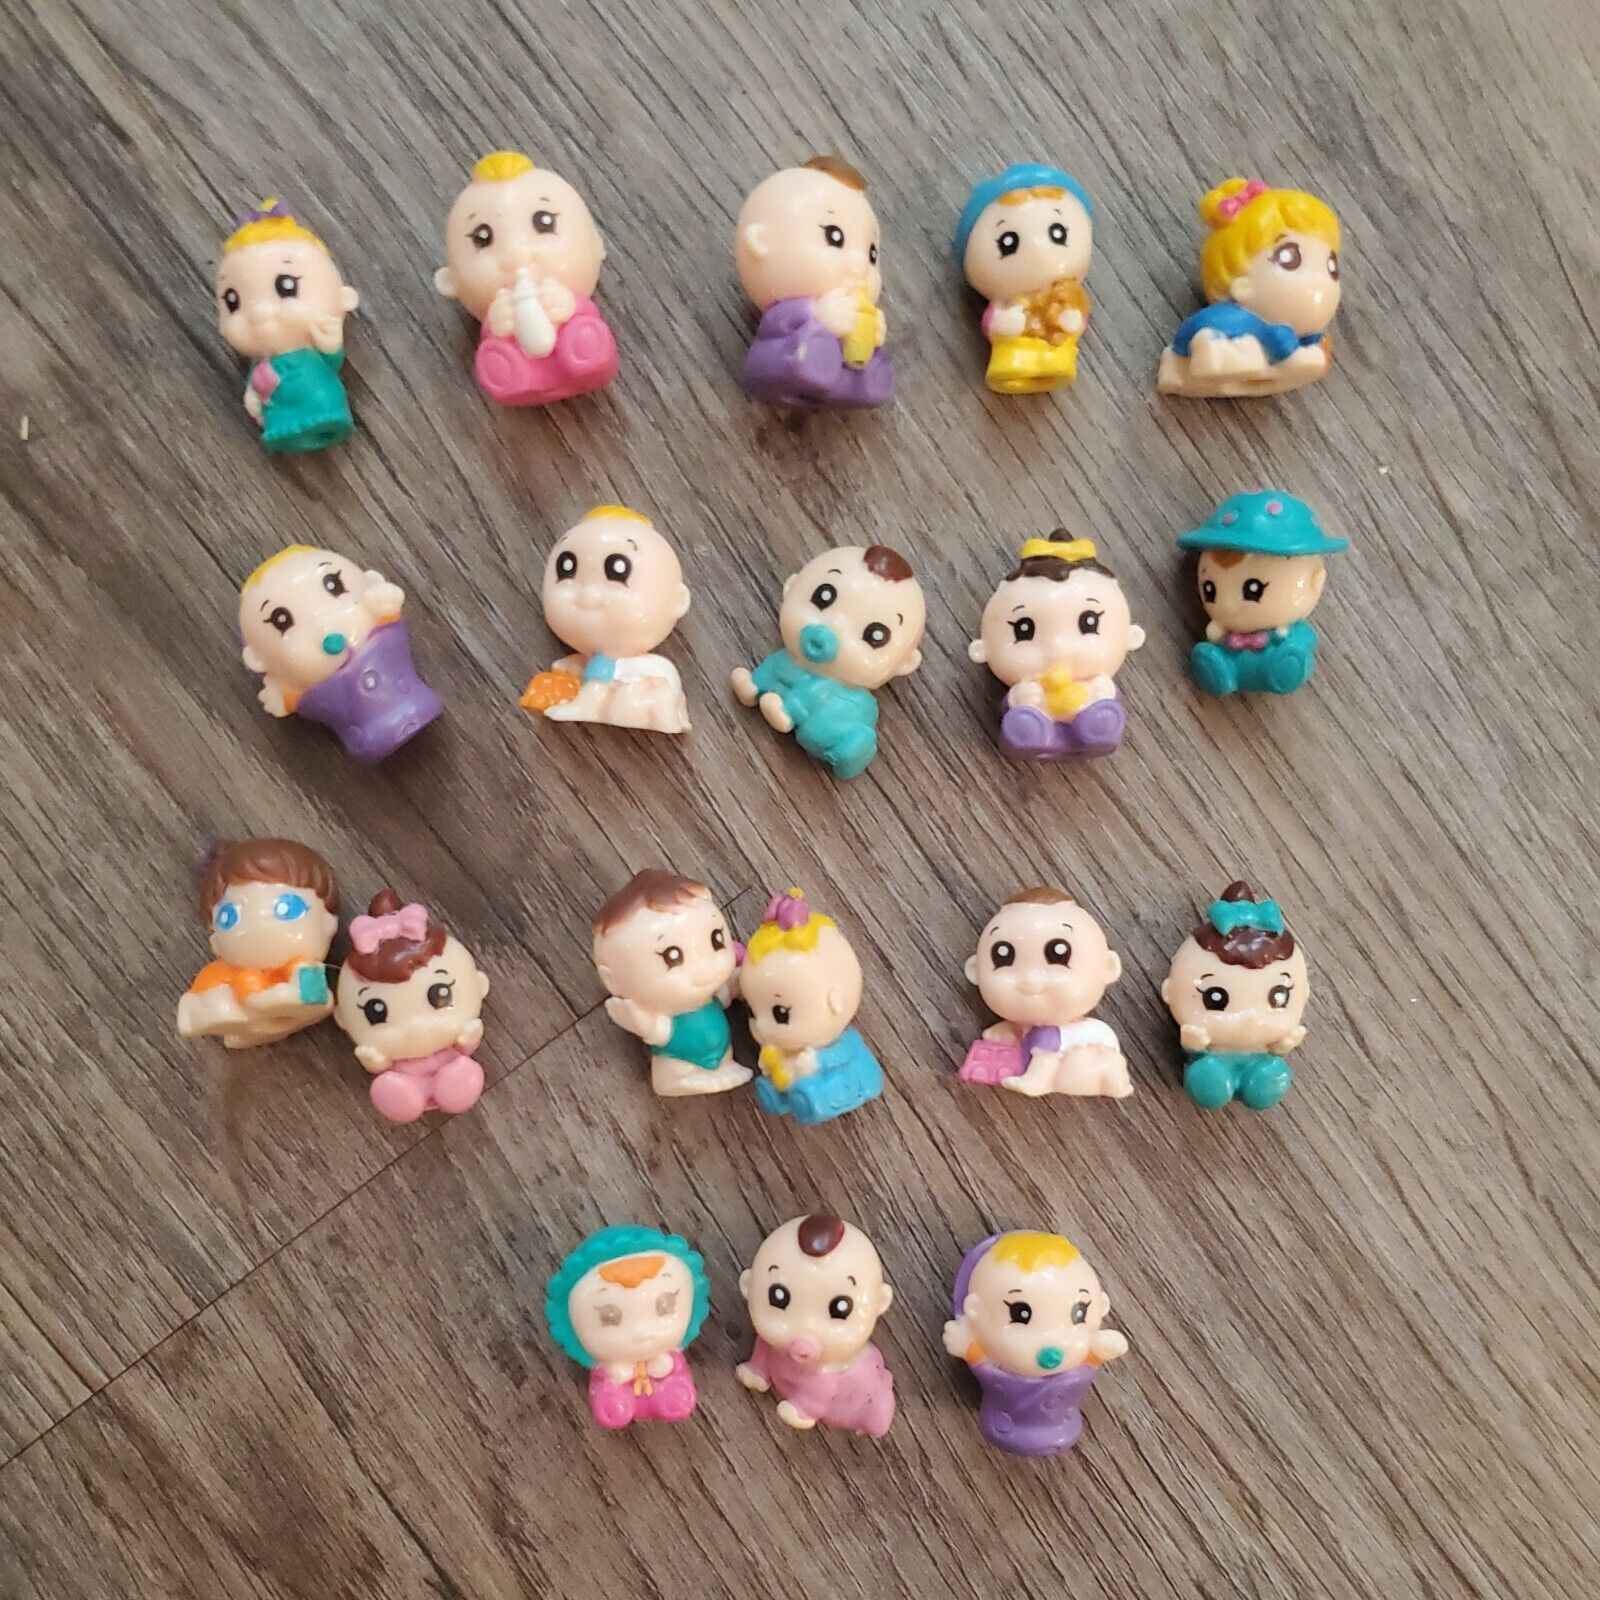 Squinkies Lot 20 Tiny Figures dolls  Toys ALL BABIES Bubbles Easter egg fillers 